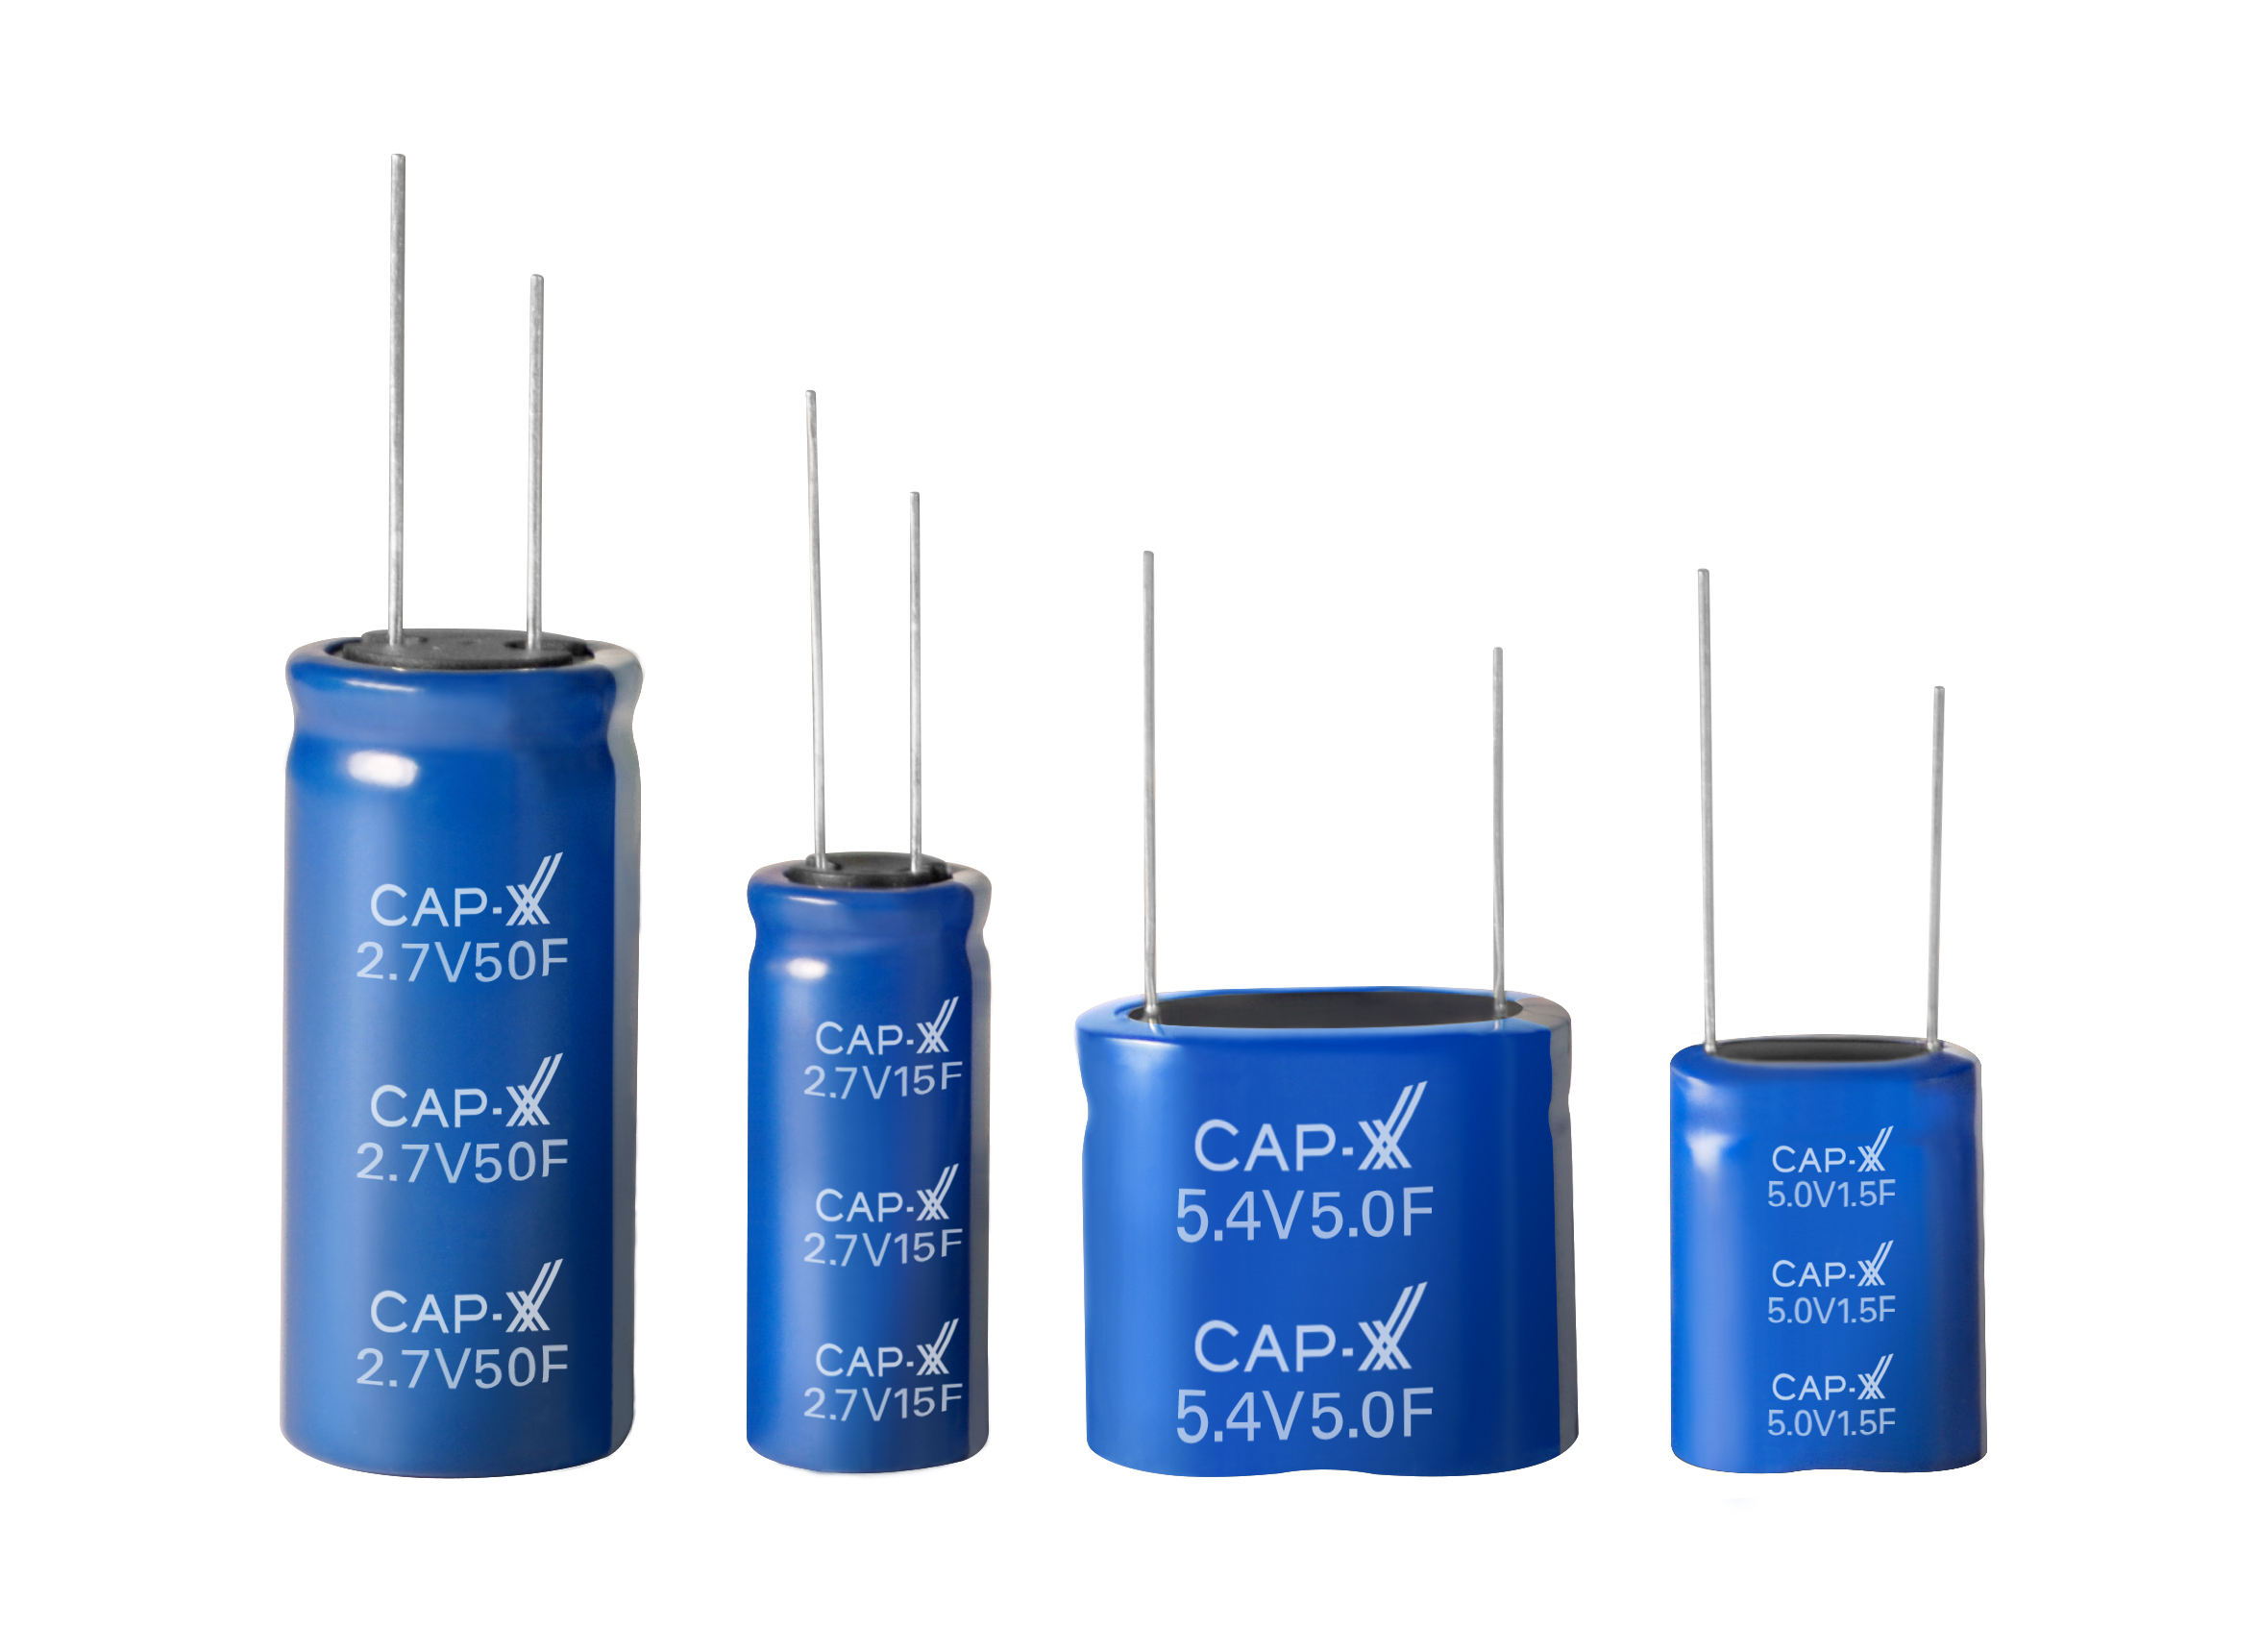 Single (2.7V) or dual-cell (5.4V) CAP-XX cylindrical supercapacitors deliver high peak pulse power and low ESR for < US$0.50 for the smallest devices (1-5F) to US$9 for the largest (400F).